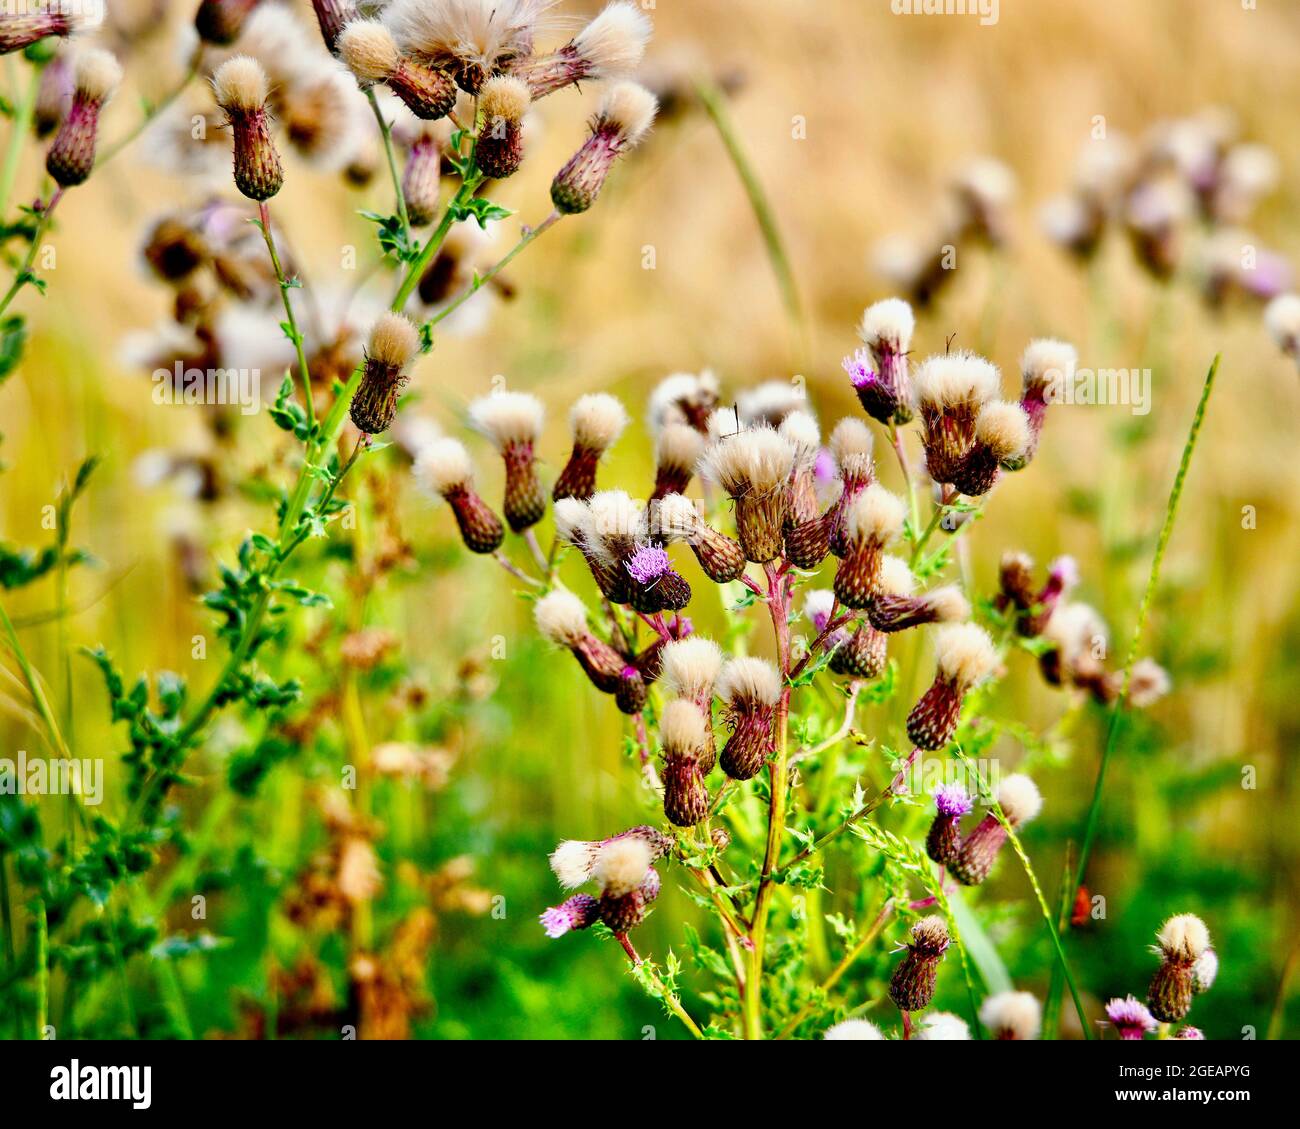 Violet drops in a meadow with dried peanut-shaped flower heads and dried grass Stock Photo